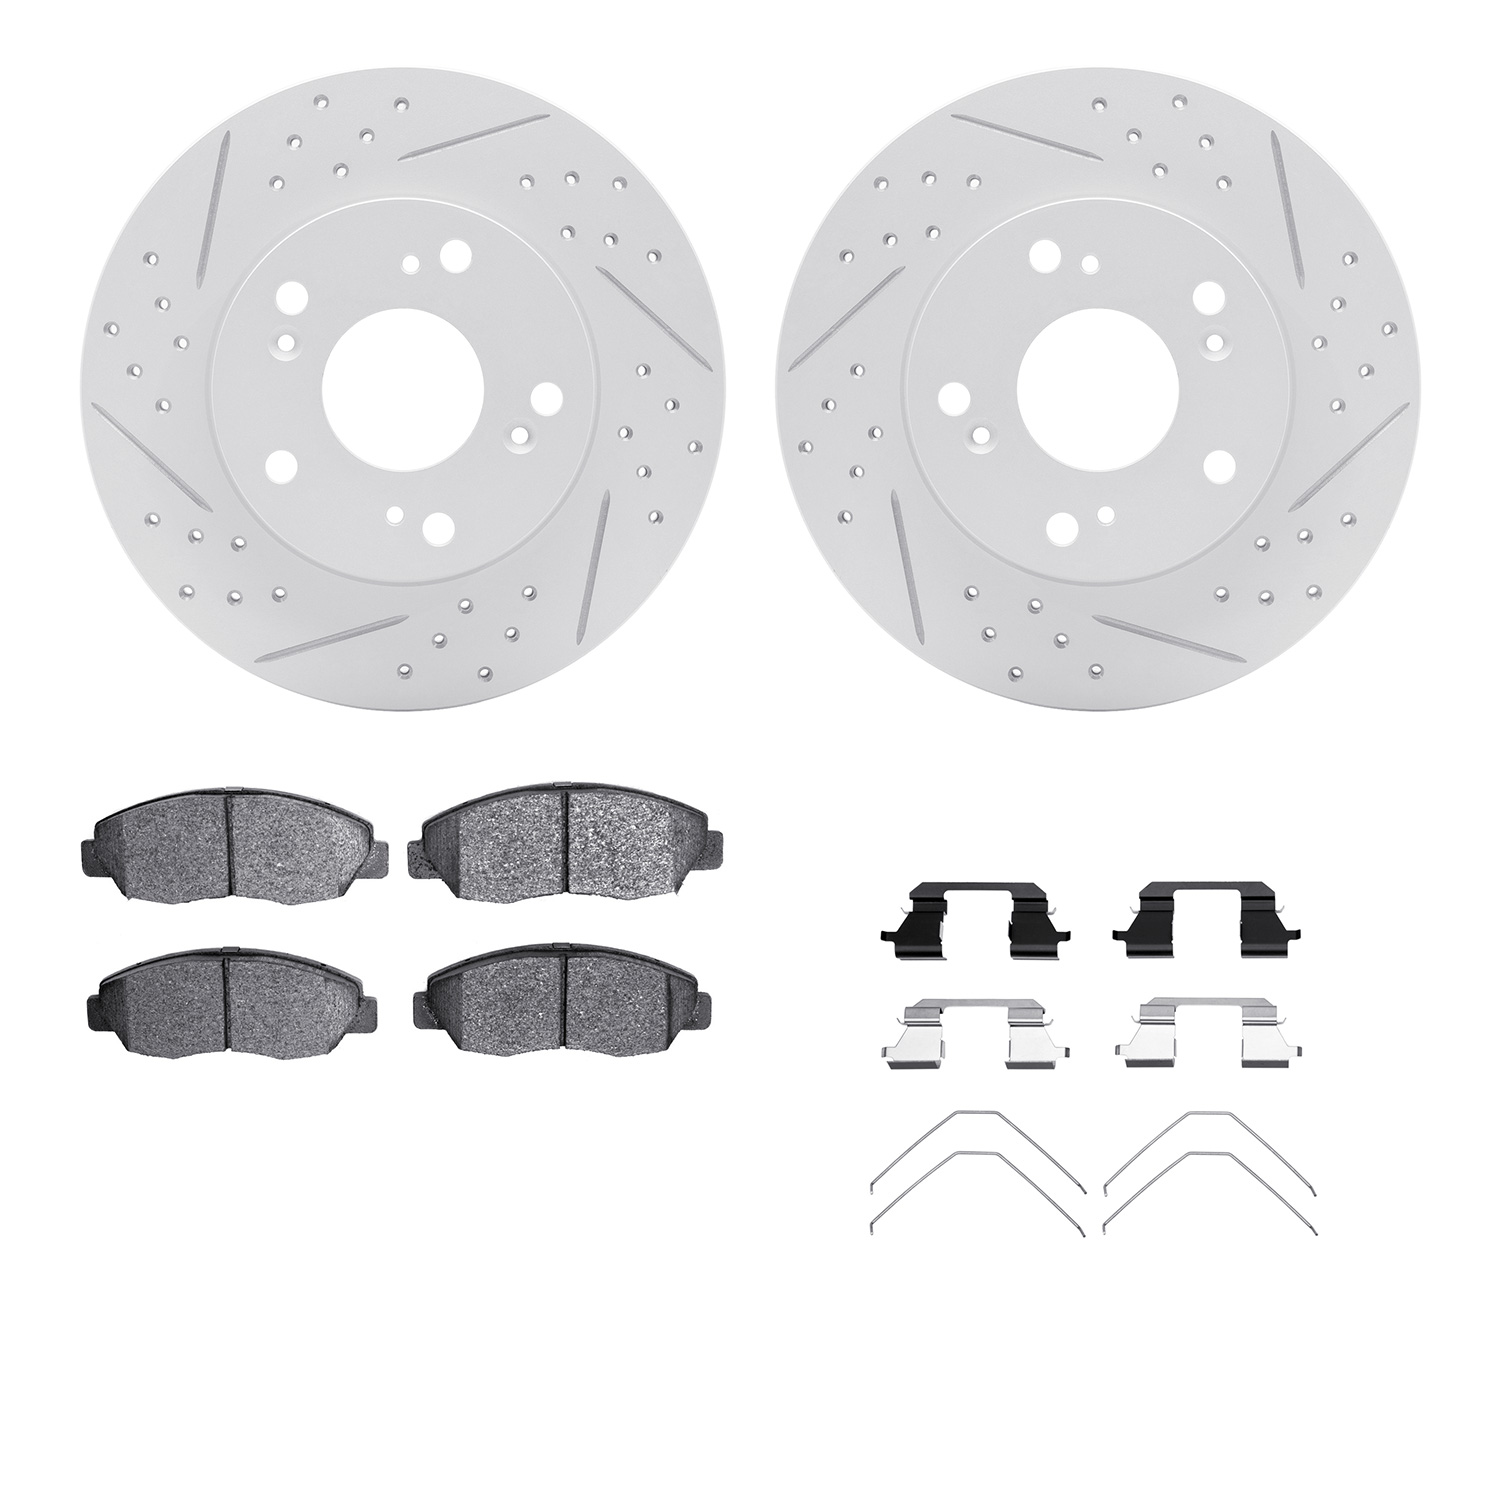 2512-59041 Geoperformance Drilled/Slotted Rotors w/5000 Advanced Brake Pads Kit & Hardware, 2012-2015 Acura/Honda, Position: Fro